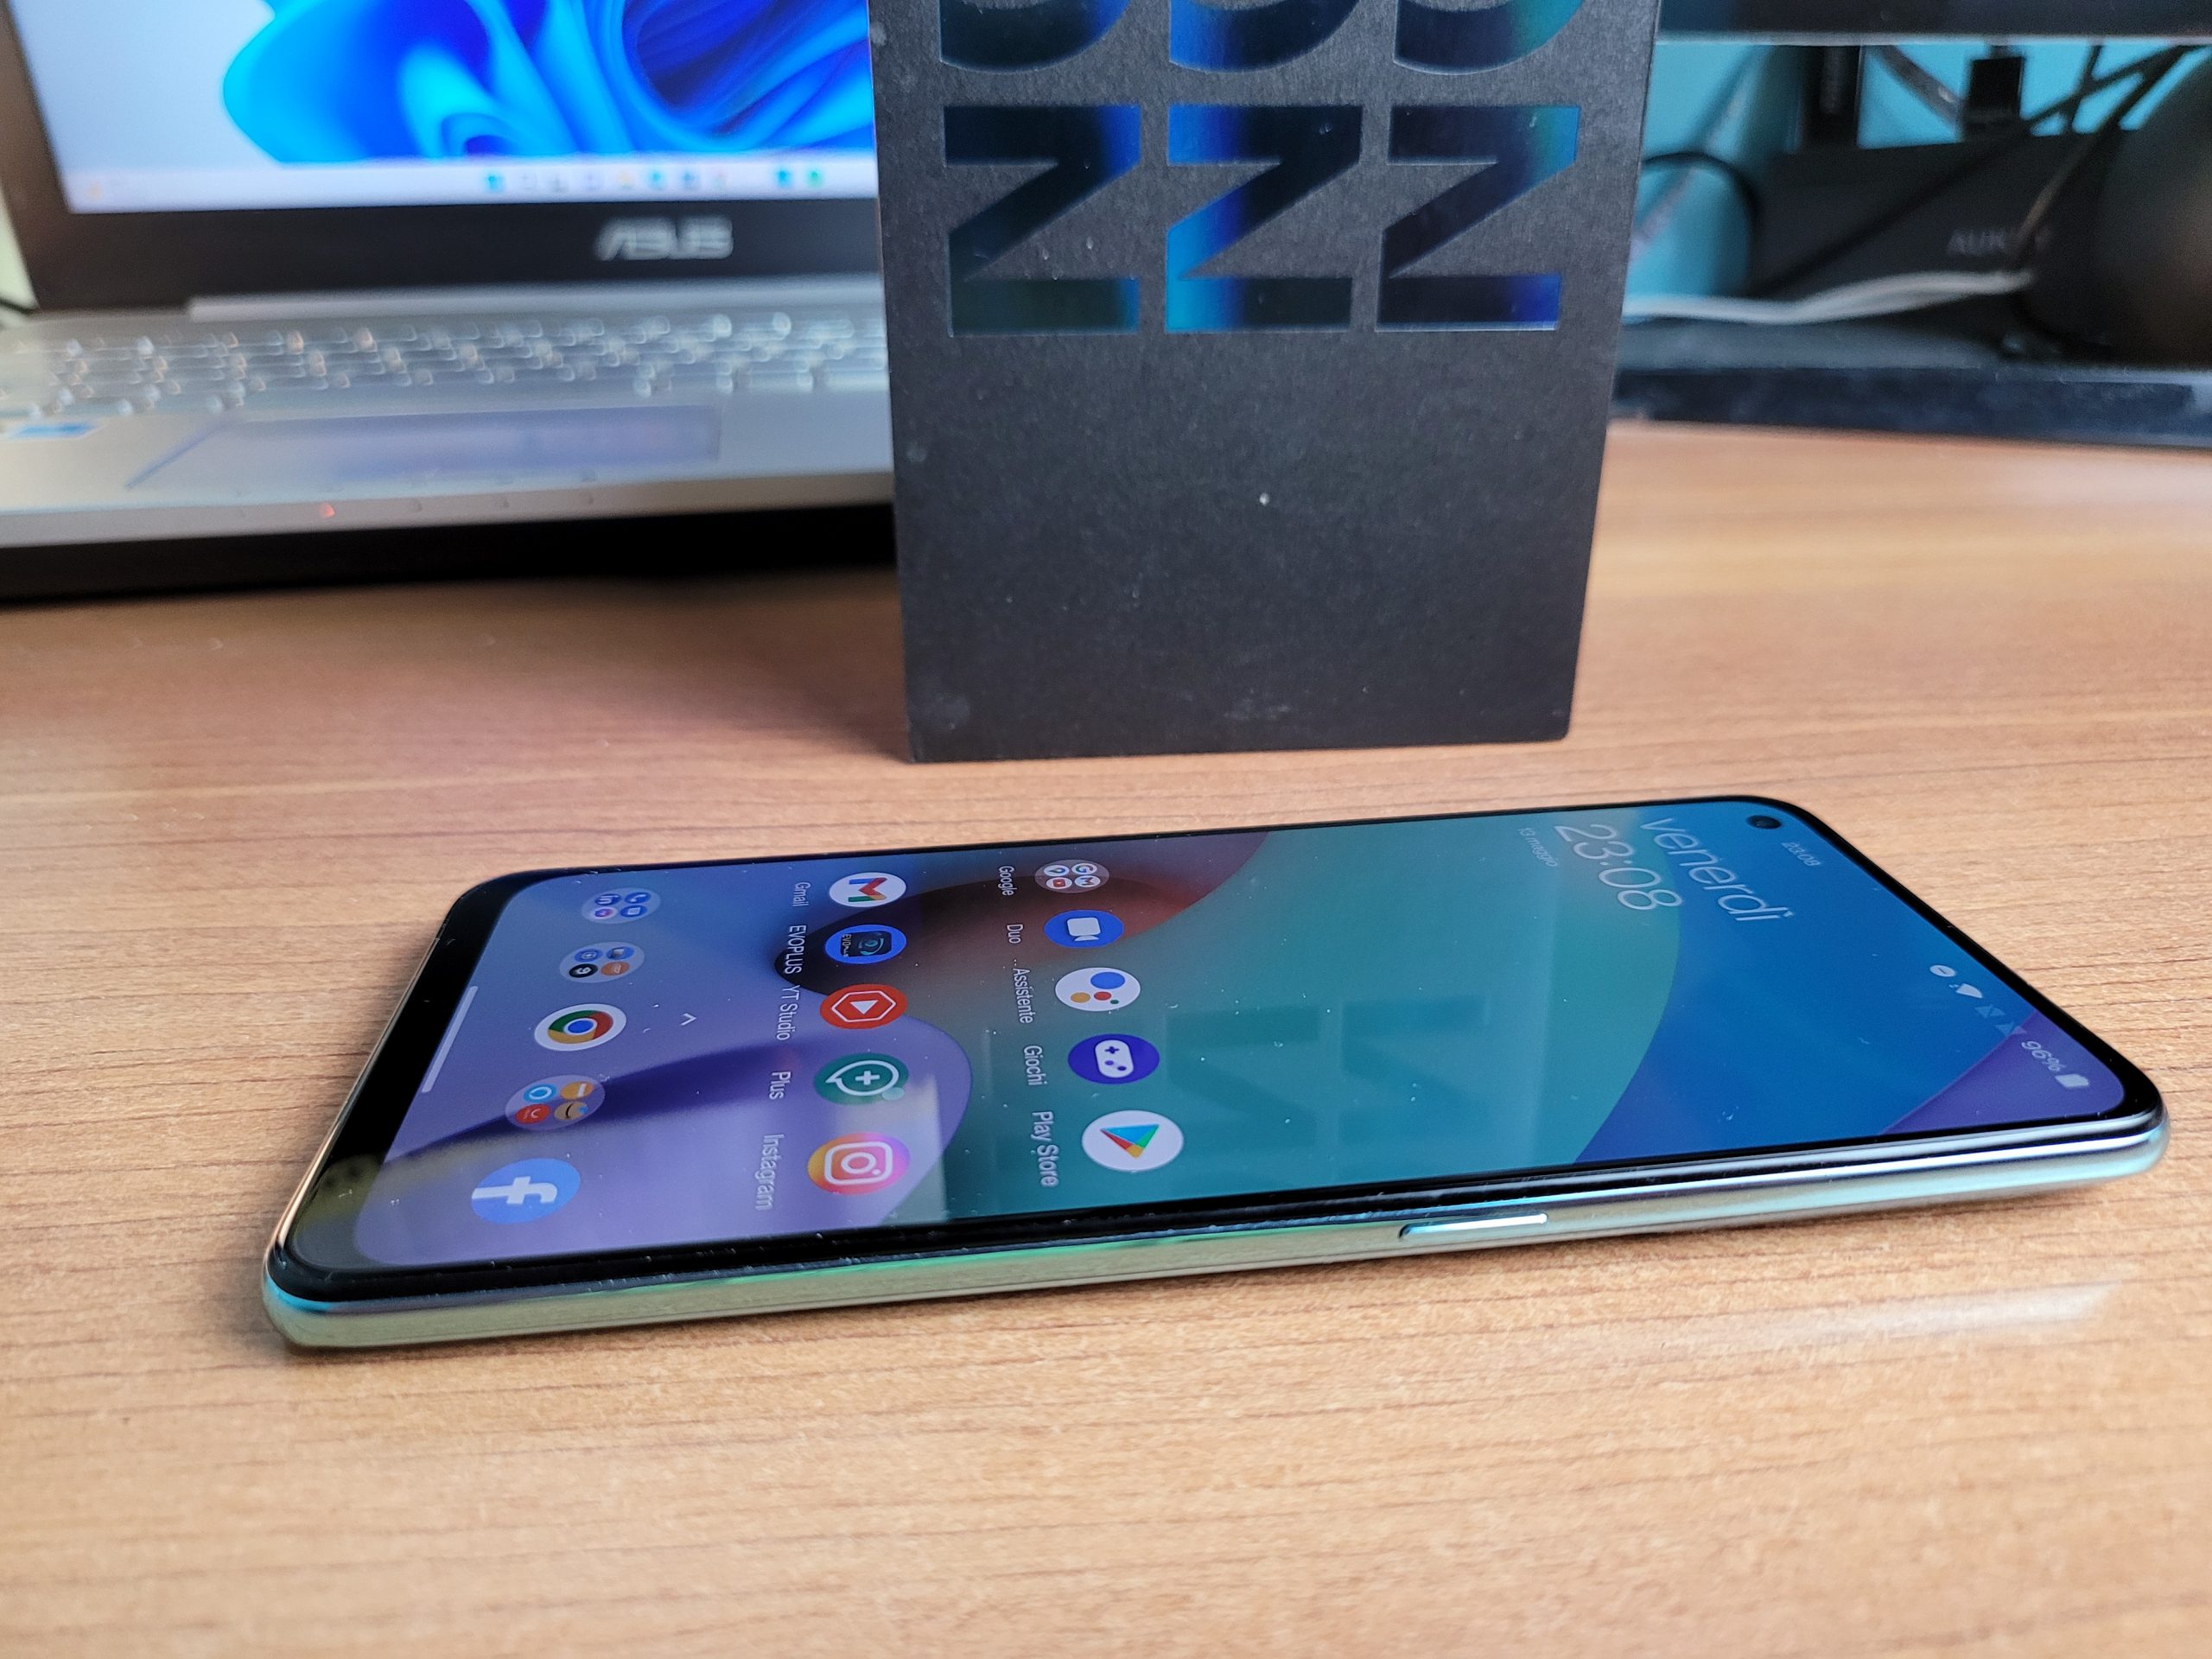 20220513 230807 scaled - OnePlus Nord CE 2 5G recensione